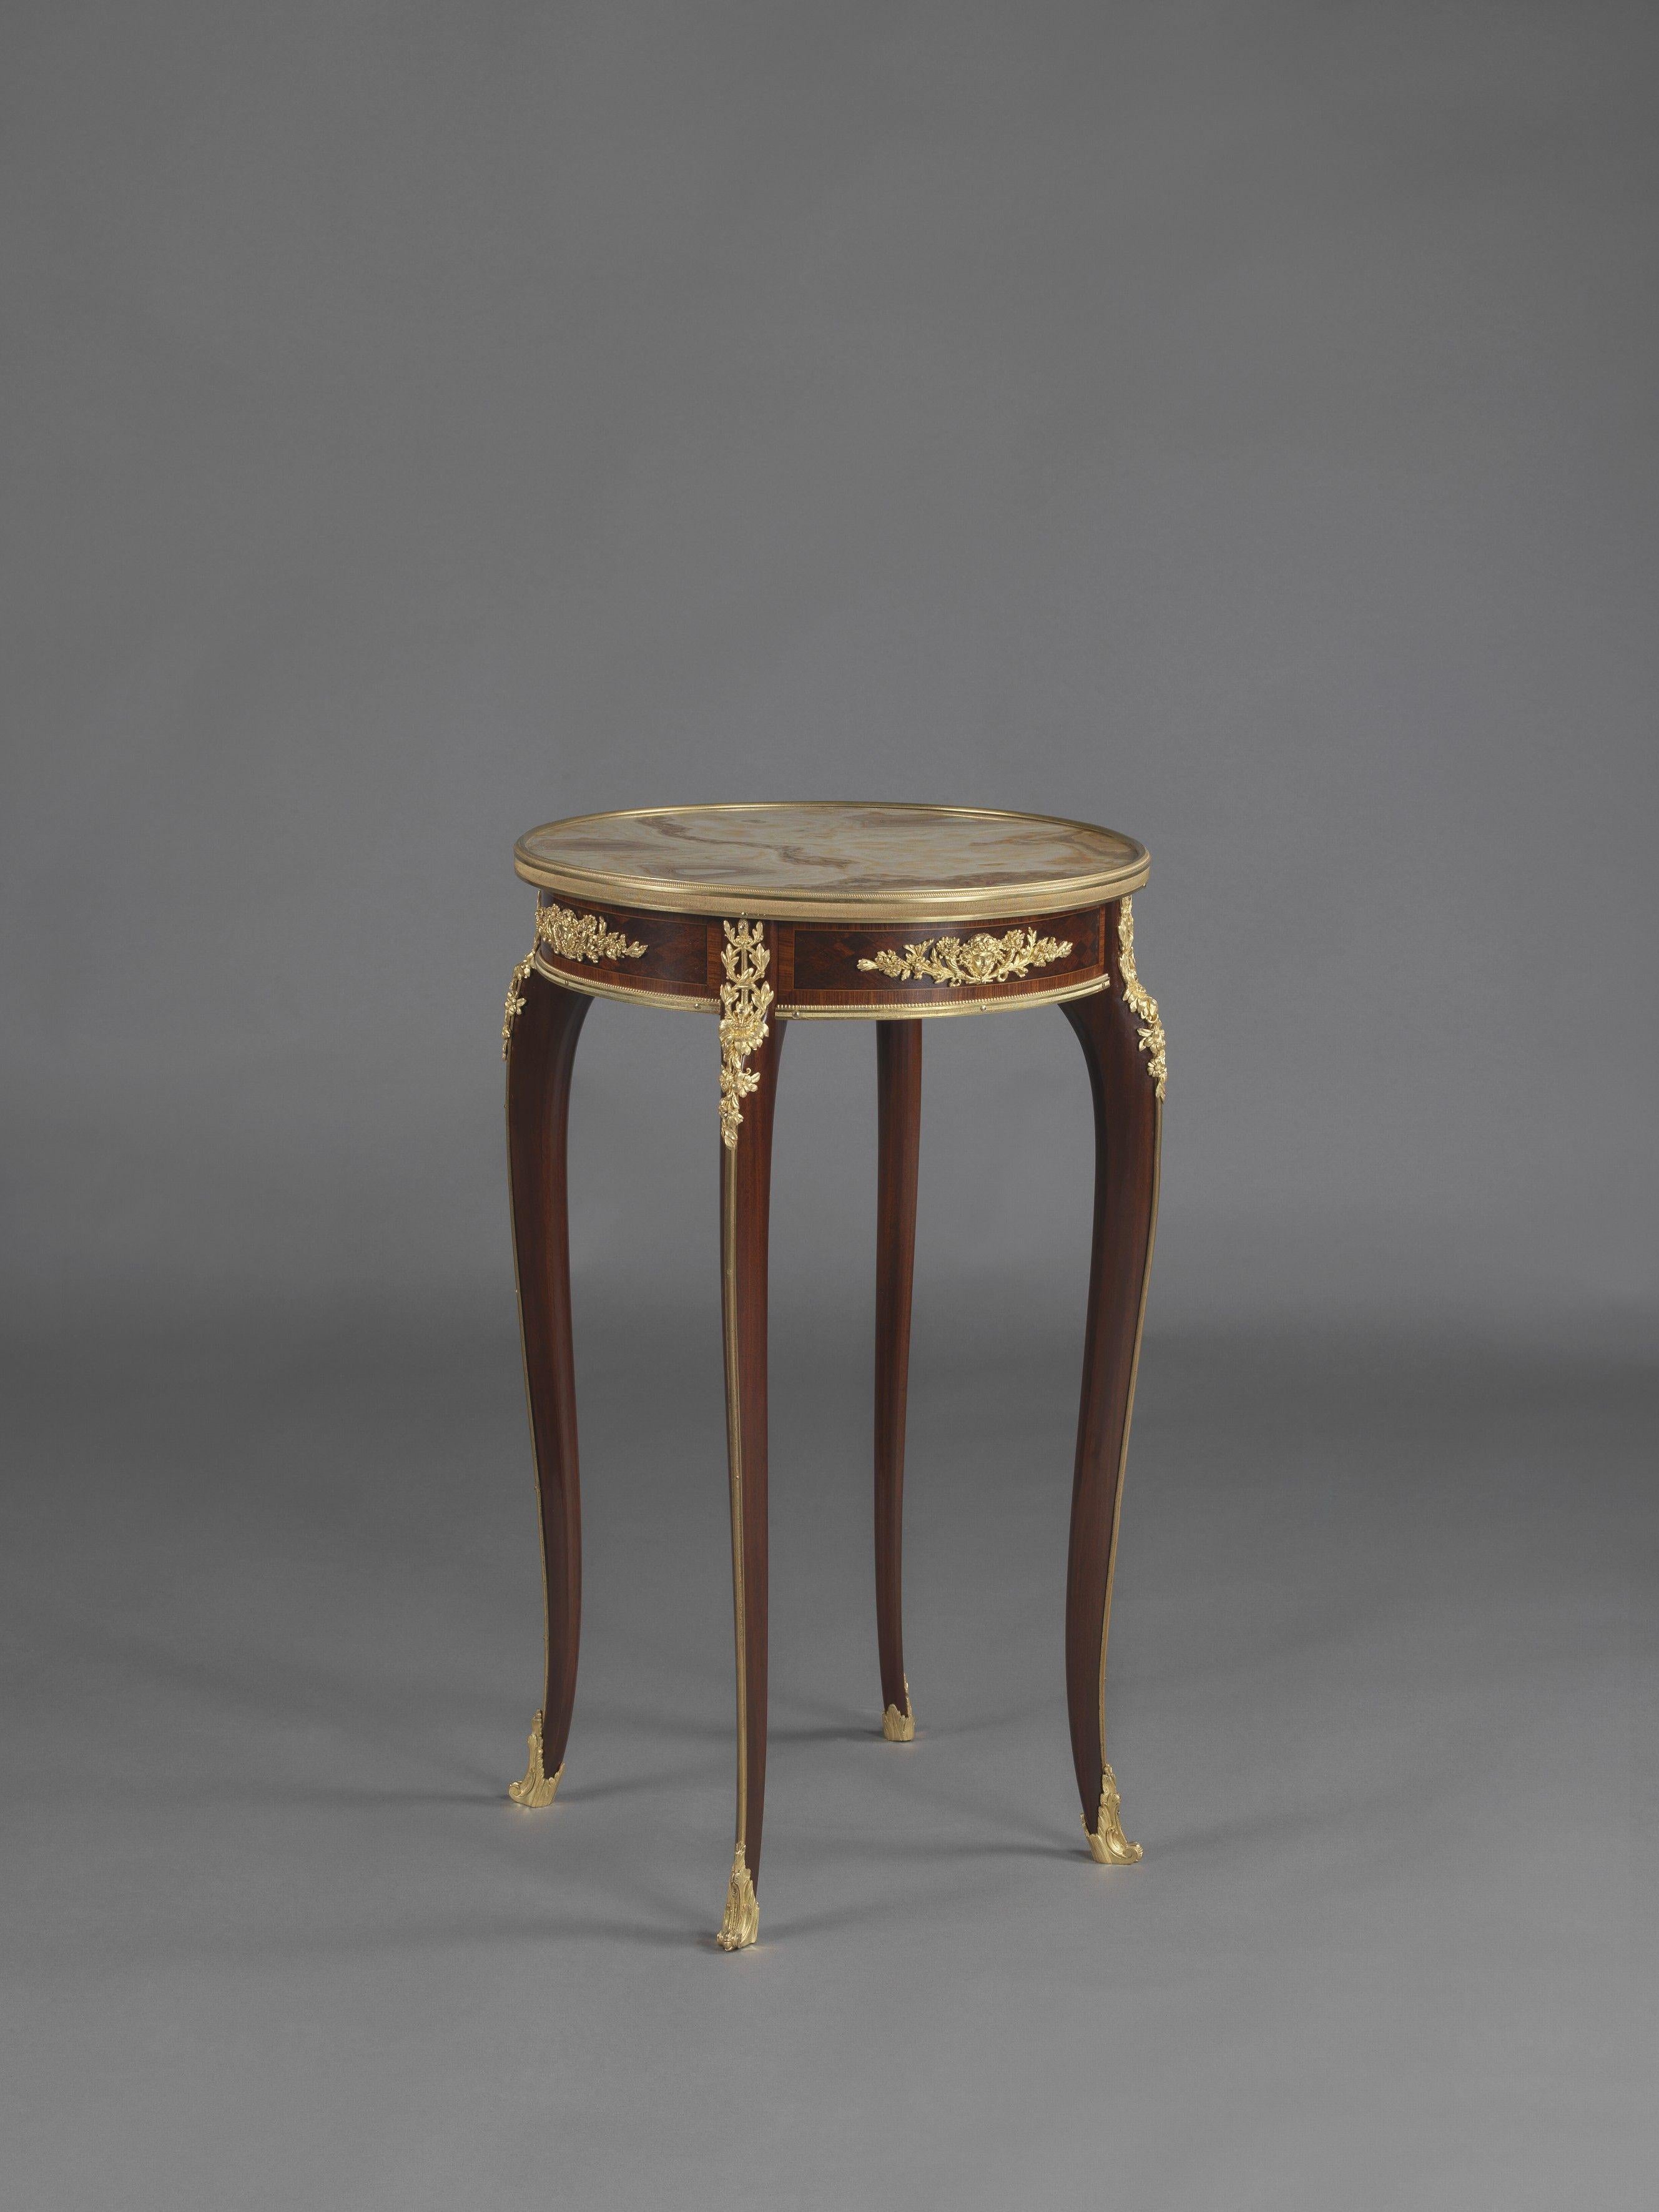 A fine Louis XV style gilt-bronze mounted mahogany Parquetry gueridon with a rare Alabastro Fiorito marble top, attributed to François Linke.

French, circa 1890. 

This fine mahogany gueridon has an inset alabastro fiorito marble top within a